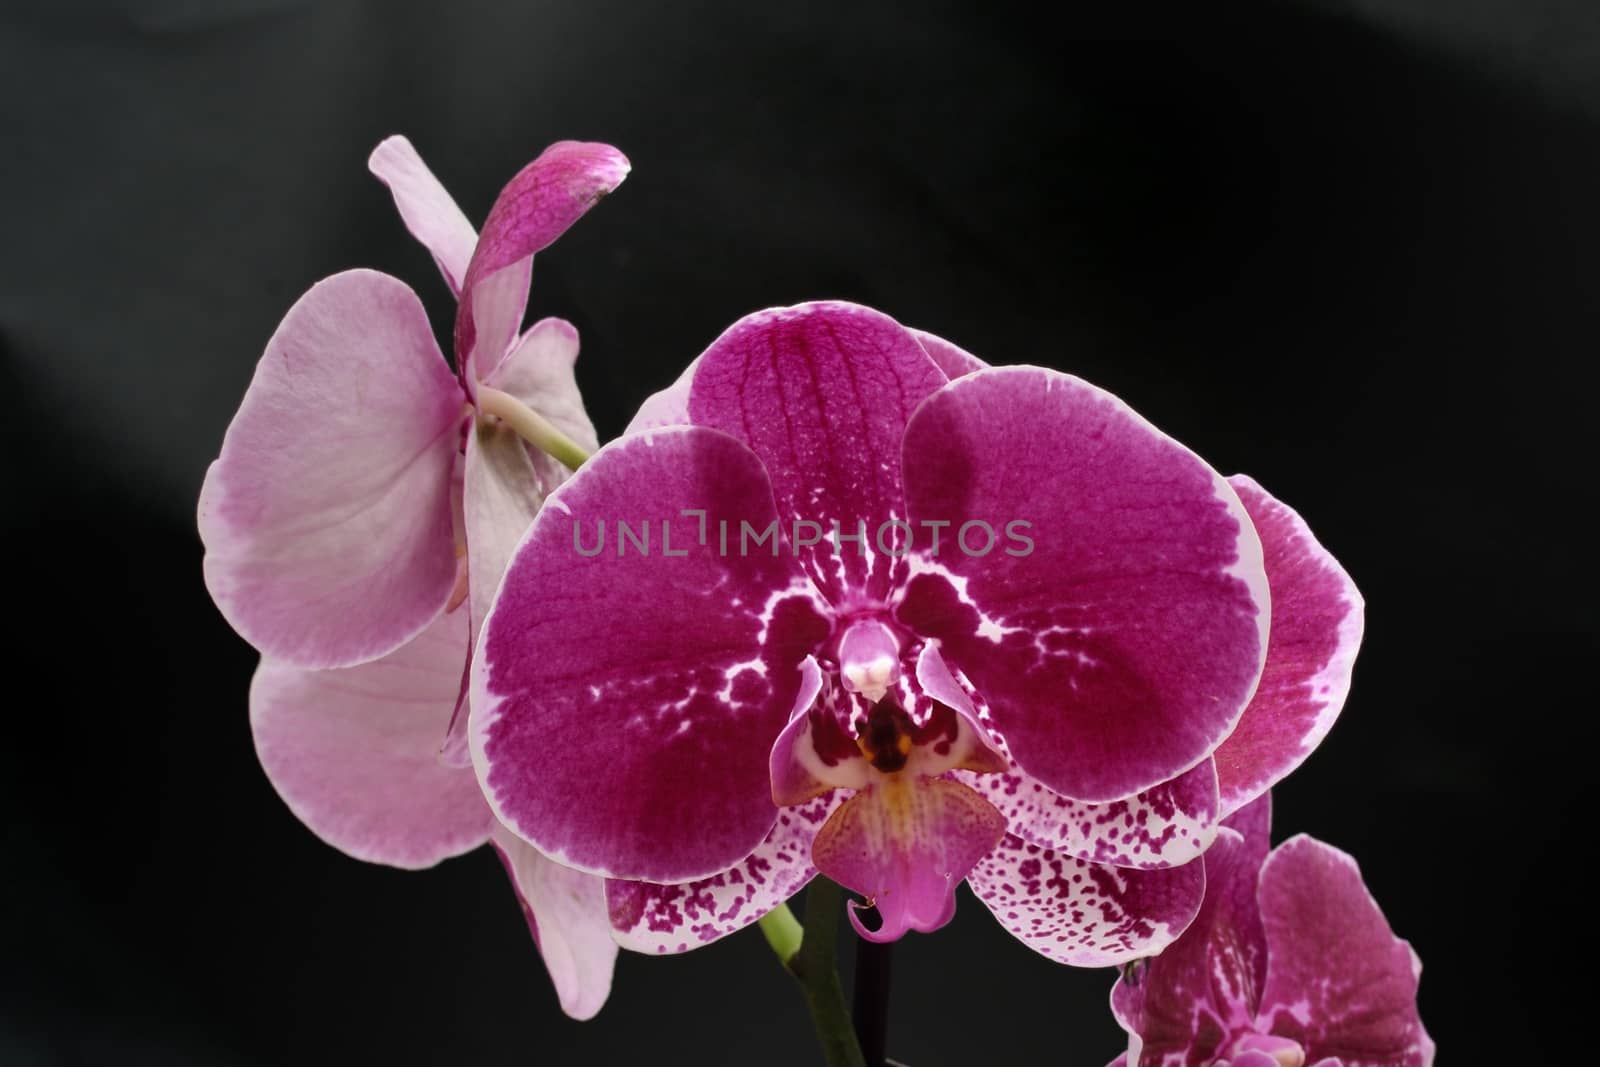 Purple Orchid on black background by pauws99